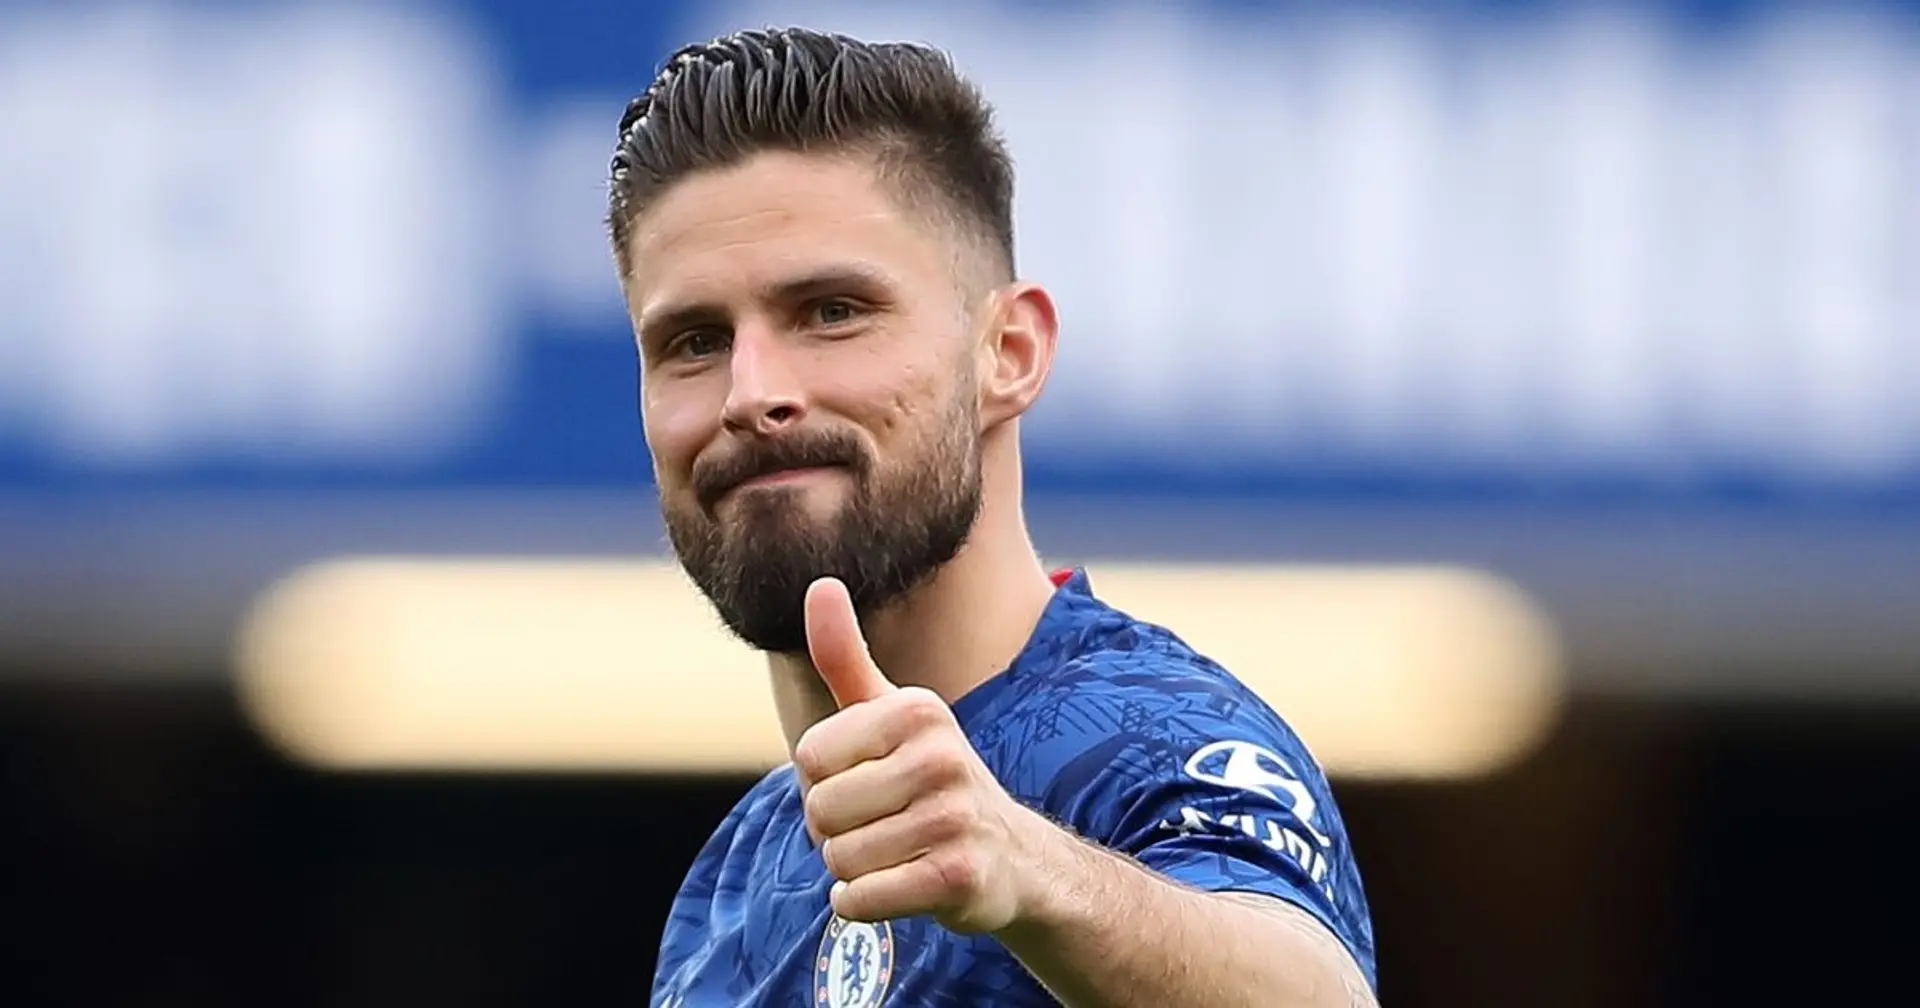 'There aren't too many strikers around with his skillset': neutral fans believe Chelsea should keep Giroud